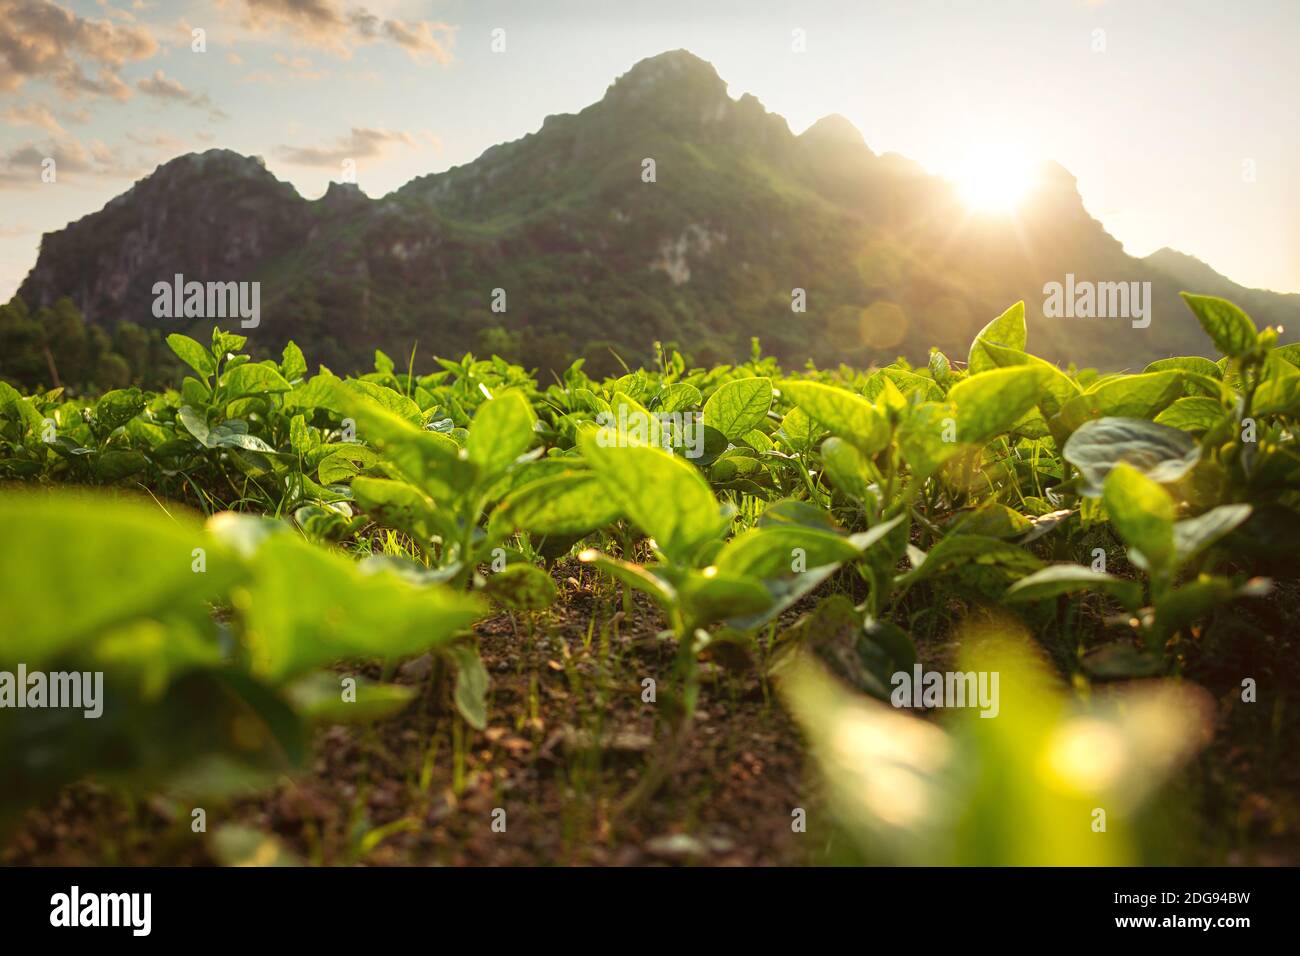 Small plants on a field behind a mountain at sunset Stock Photo